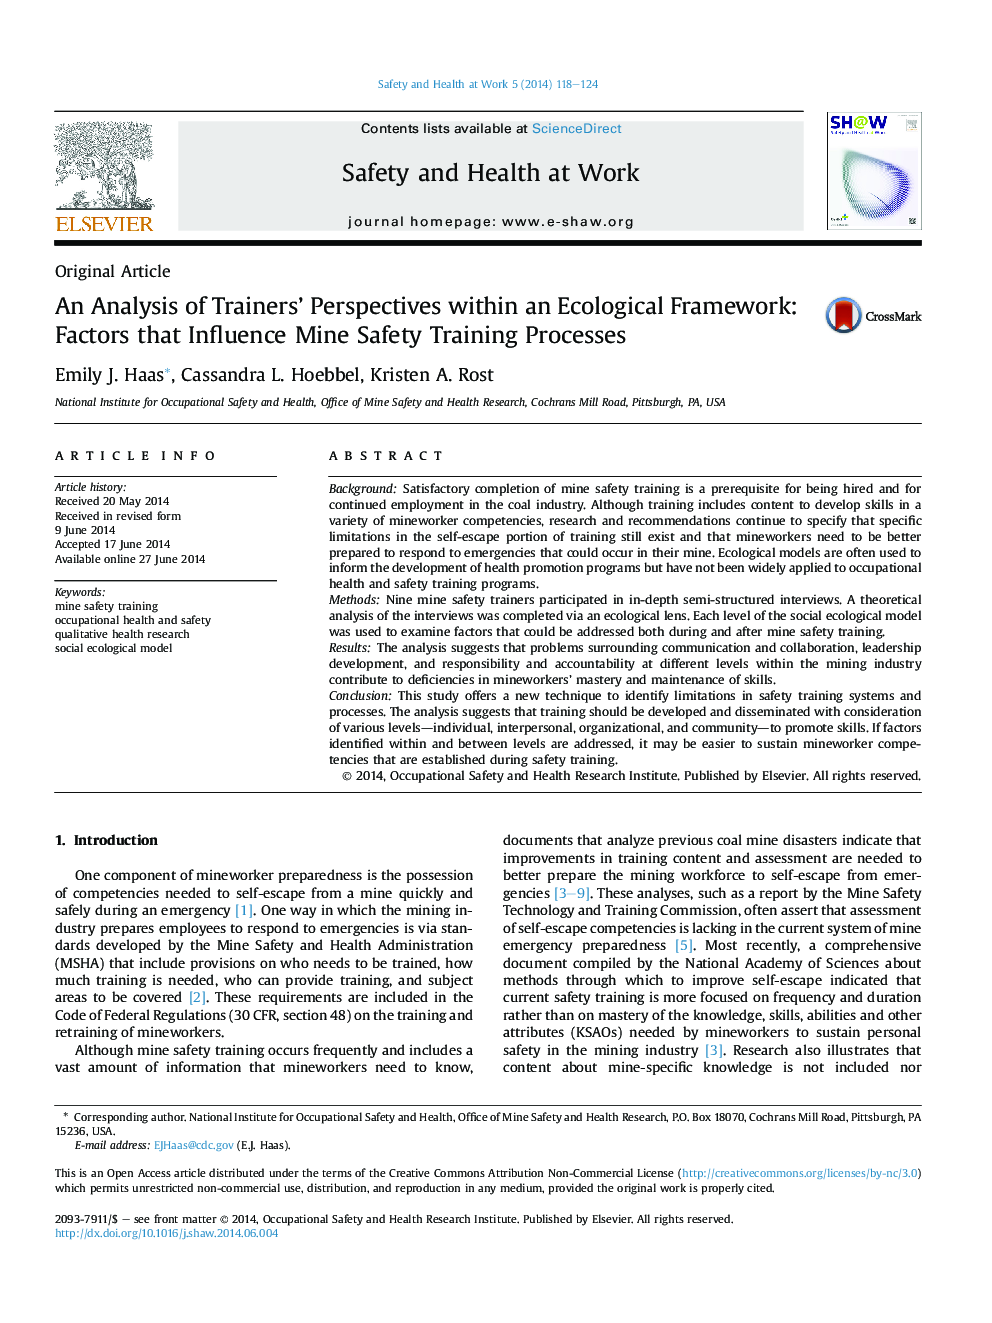 An Analysis of Trainers' Perspectives within an Ecological Framework: Factors that Influence Mine Safety Training Processes 